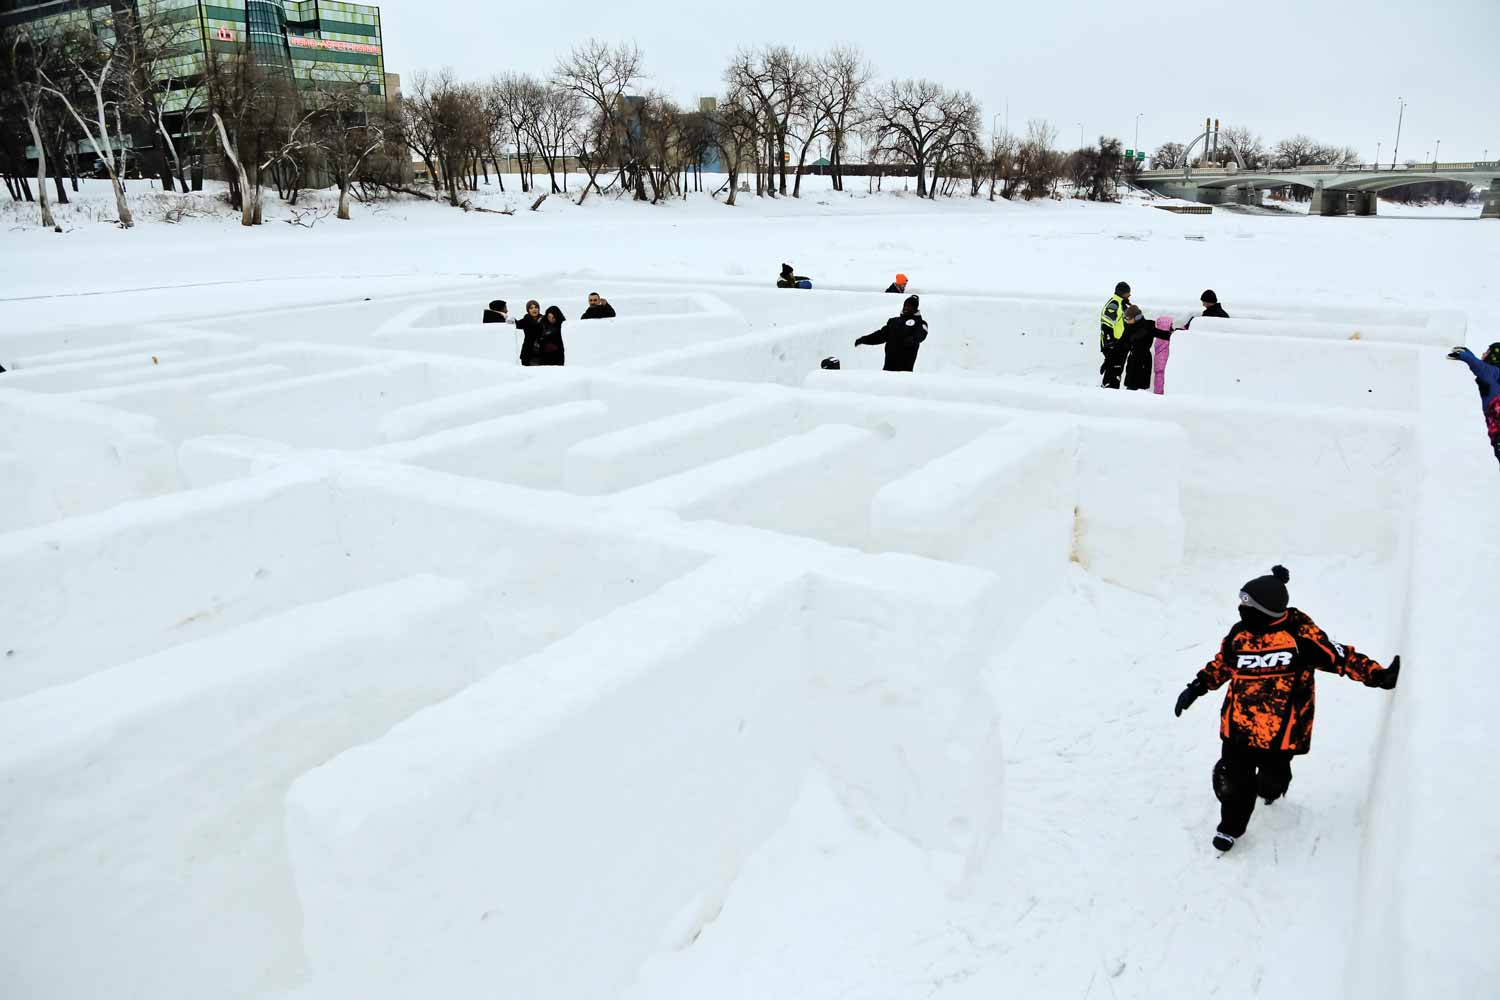 Several adults and children are navigating through a low maze of ice on the skating trail